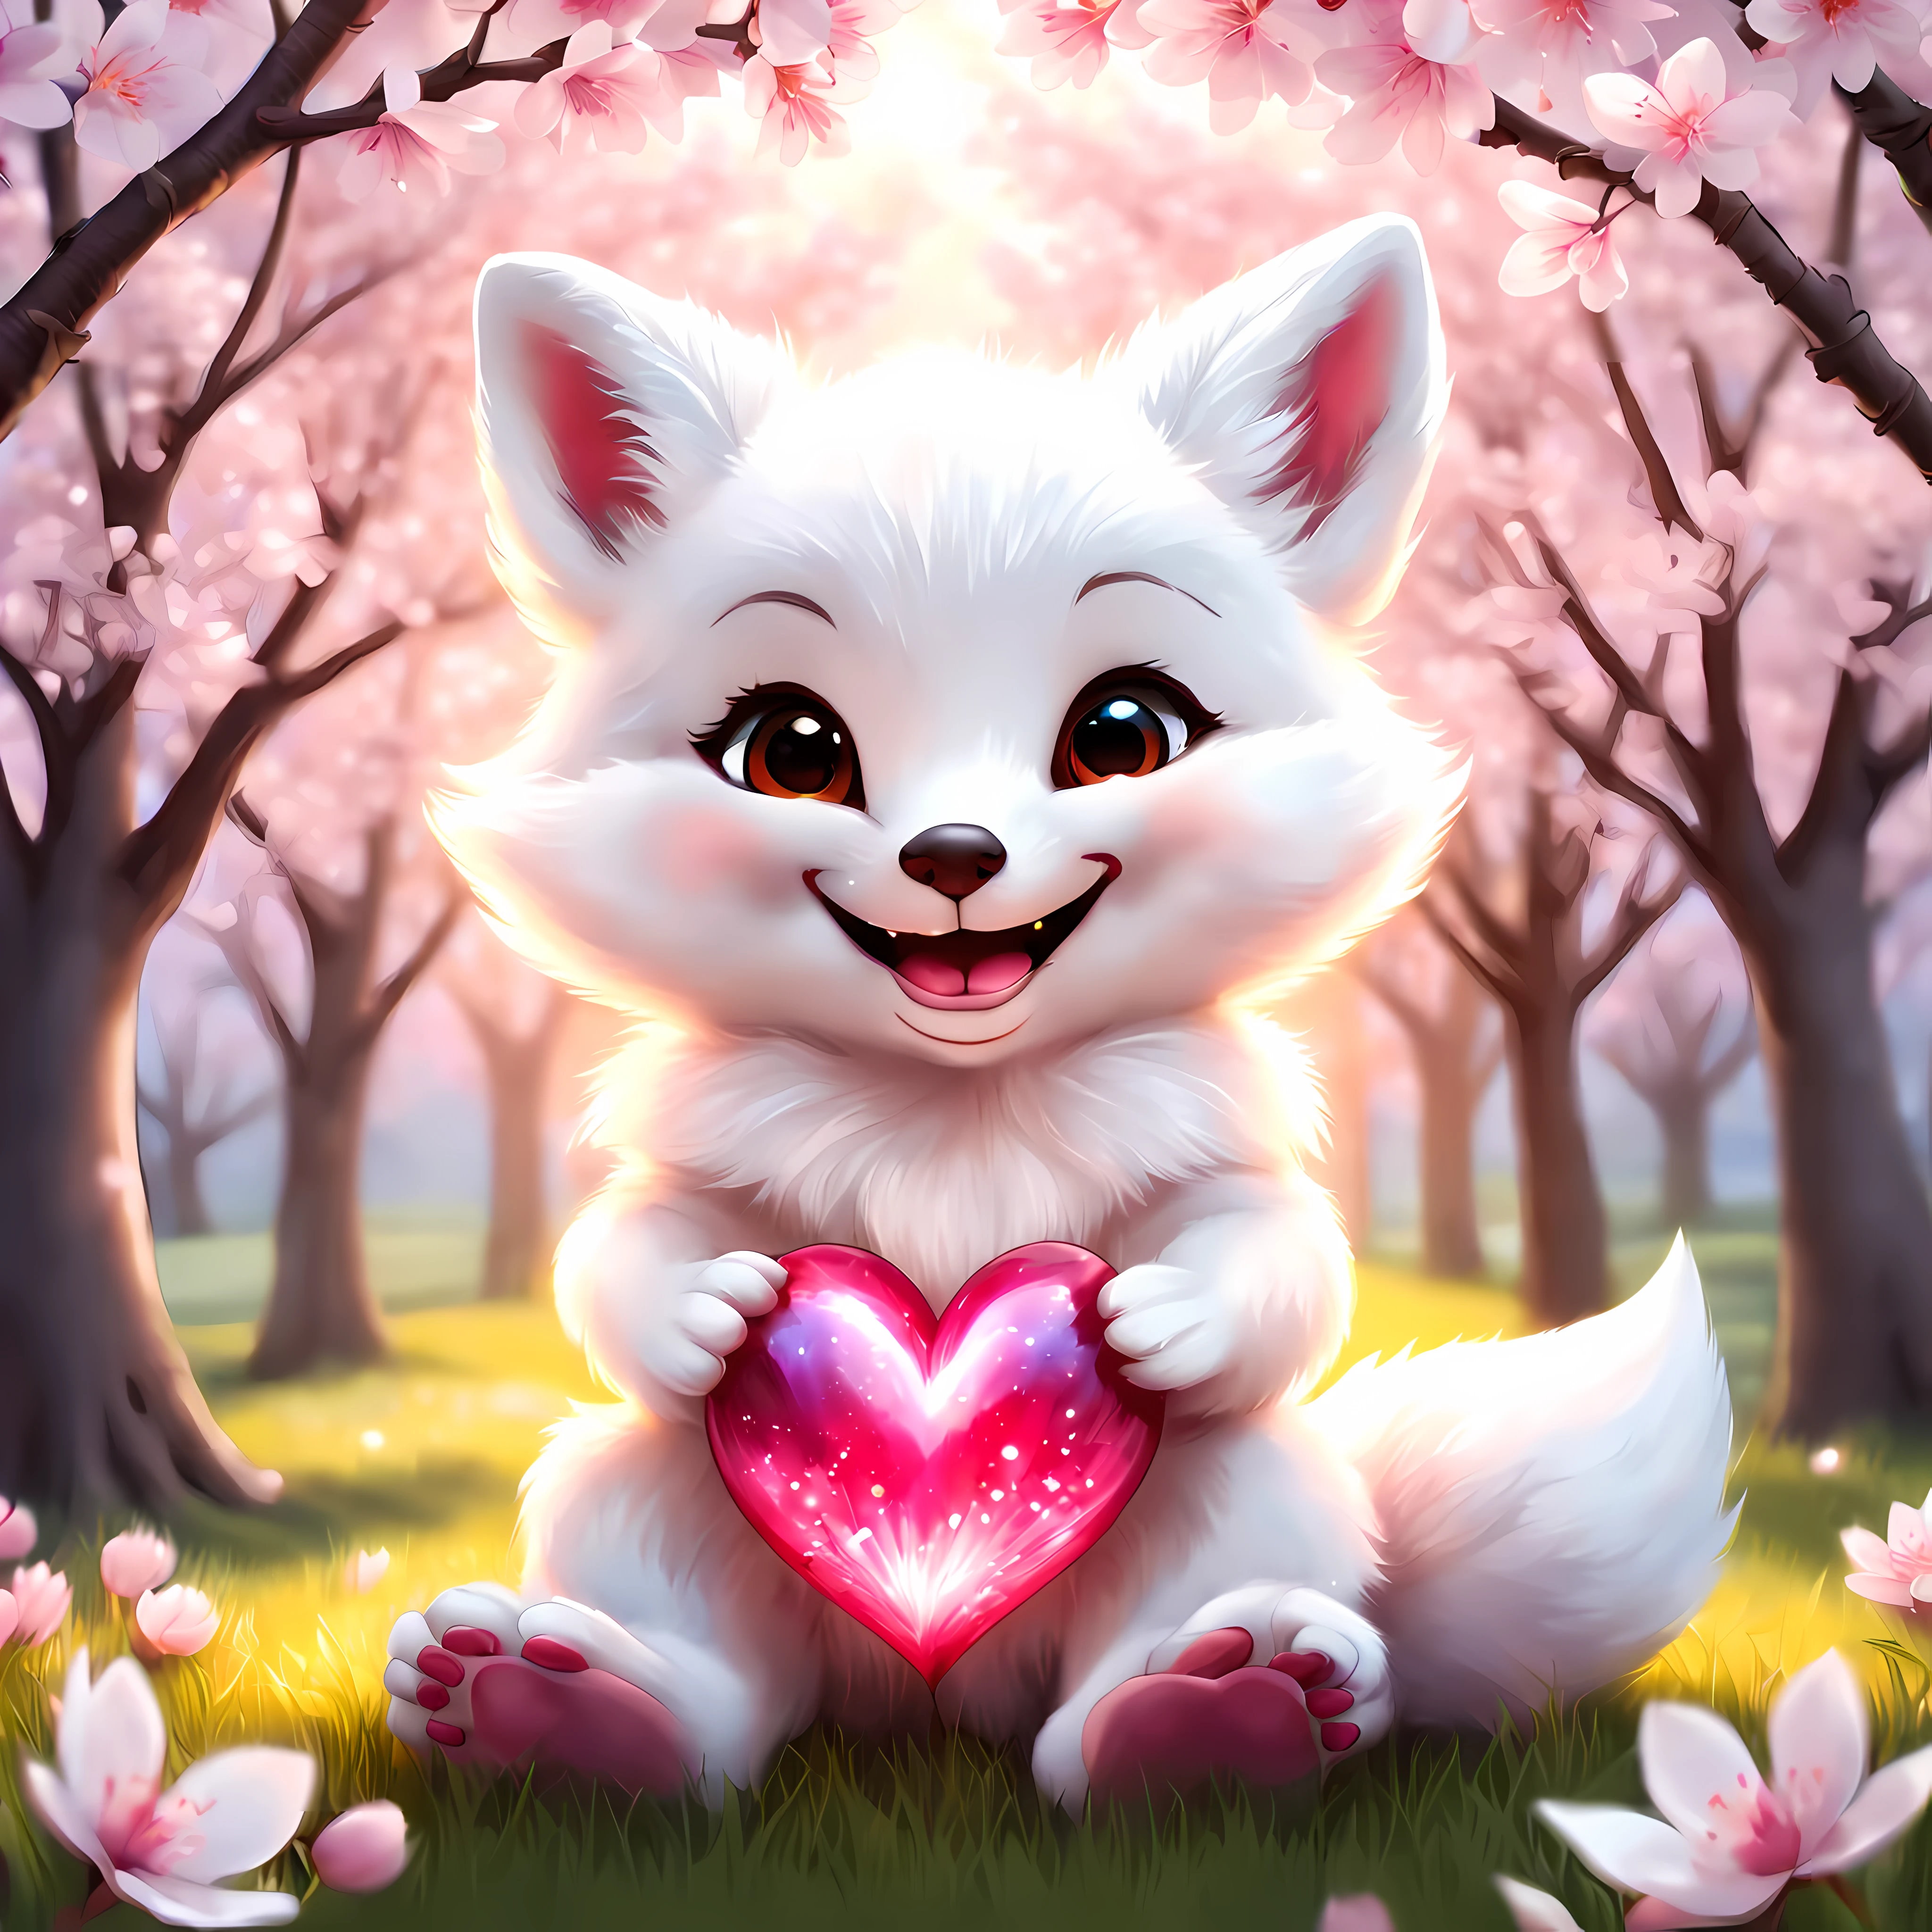 (Cute cartoon style), ((symmetrical close up front view of an adorable)) white fox cub gracefully sitting on a soft grass and gently holding a vibrant giant glowing heart between its paws, (((smiling at the viewer))), vivid eyes, ((enchanting day amidst cherry blossoms, shimmer)). | ((More_Detail))